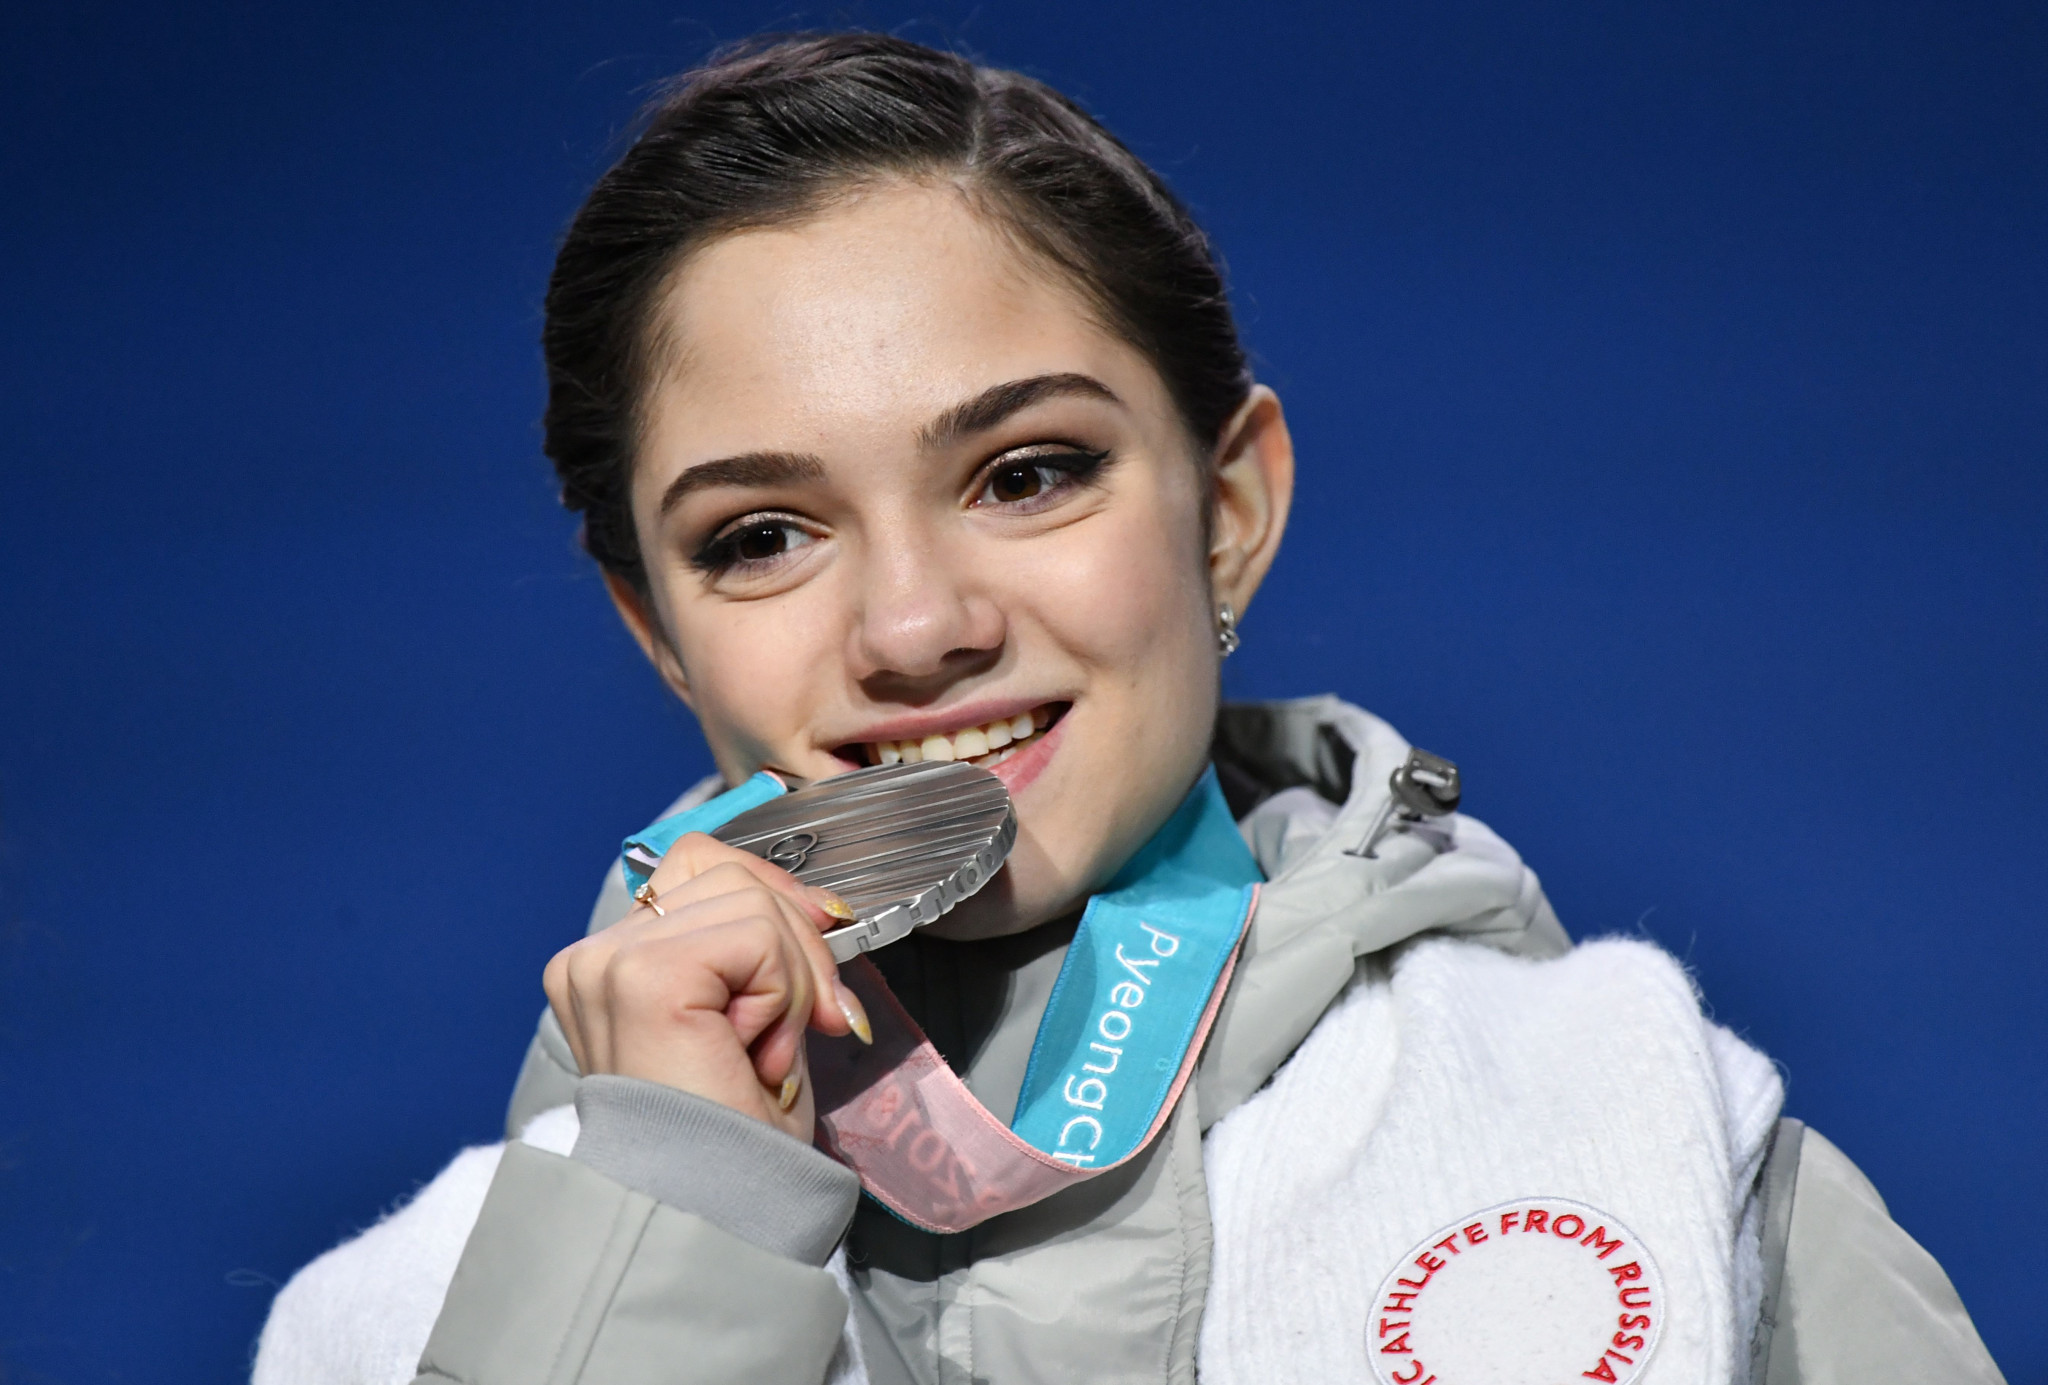 Russia's Olympic skating silver medallist Evgenia Medvedeva appeared at the IOC Executive Board meeting to appeal for her country to be allowed to march under its own flag at the Closing Ceremony of Pyeongchang 2018 ©Getty Images